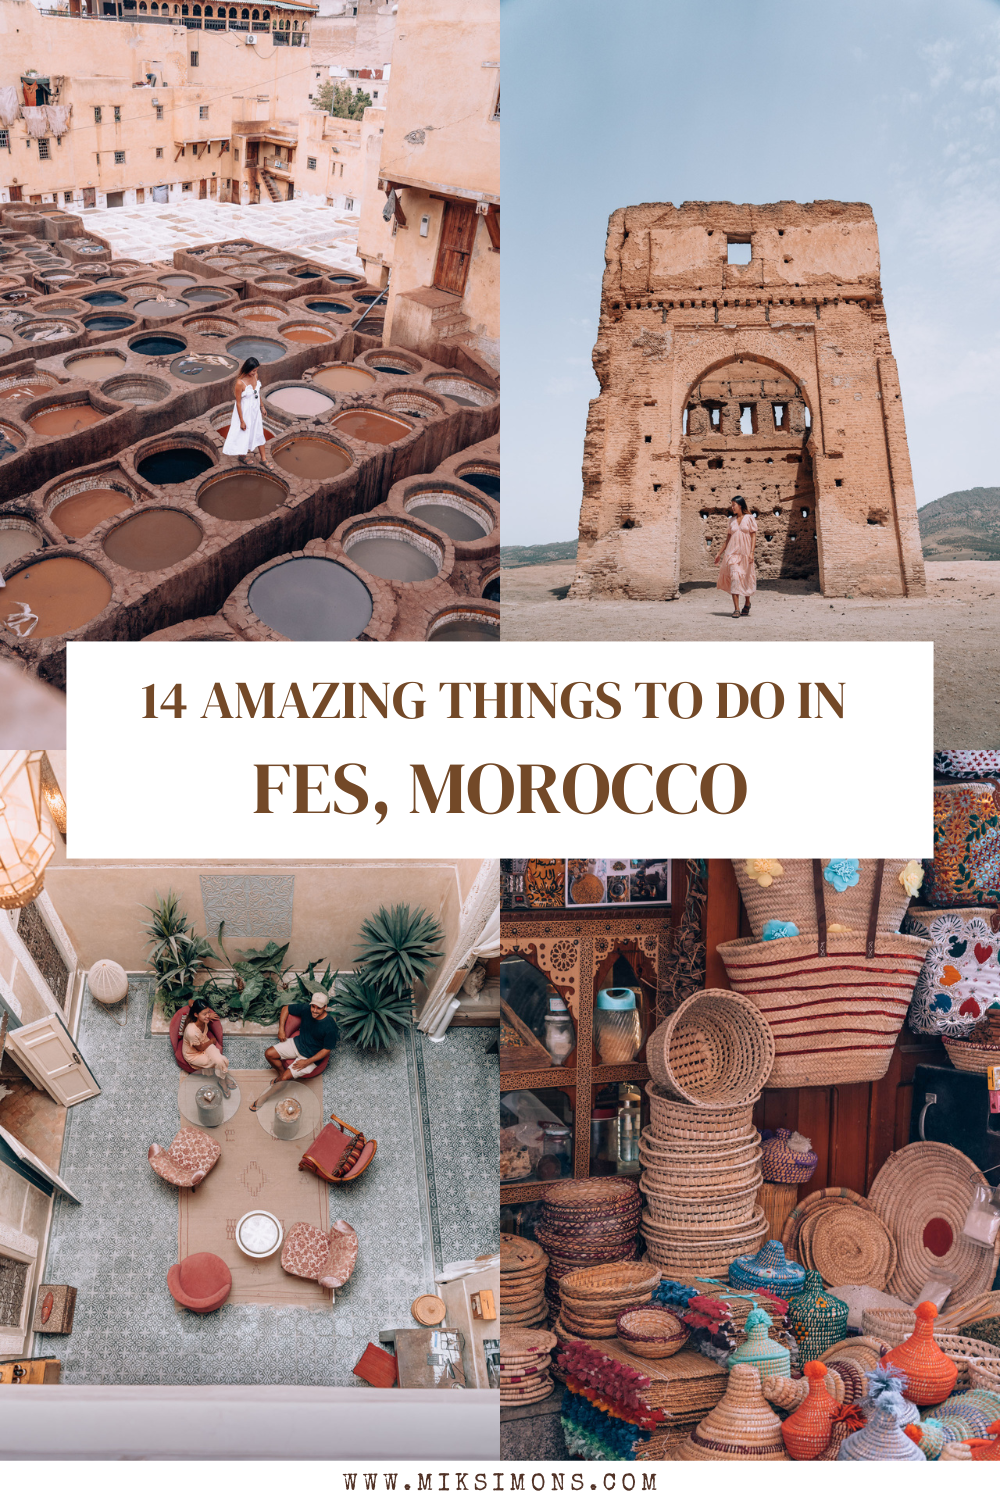 14 best Things to do in fes